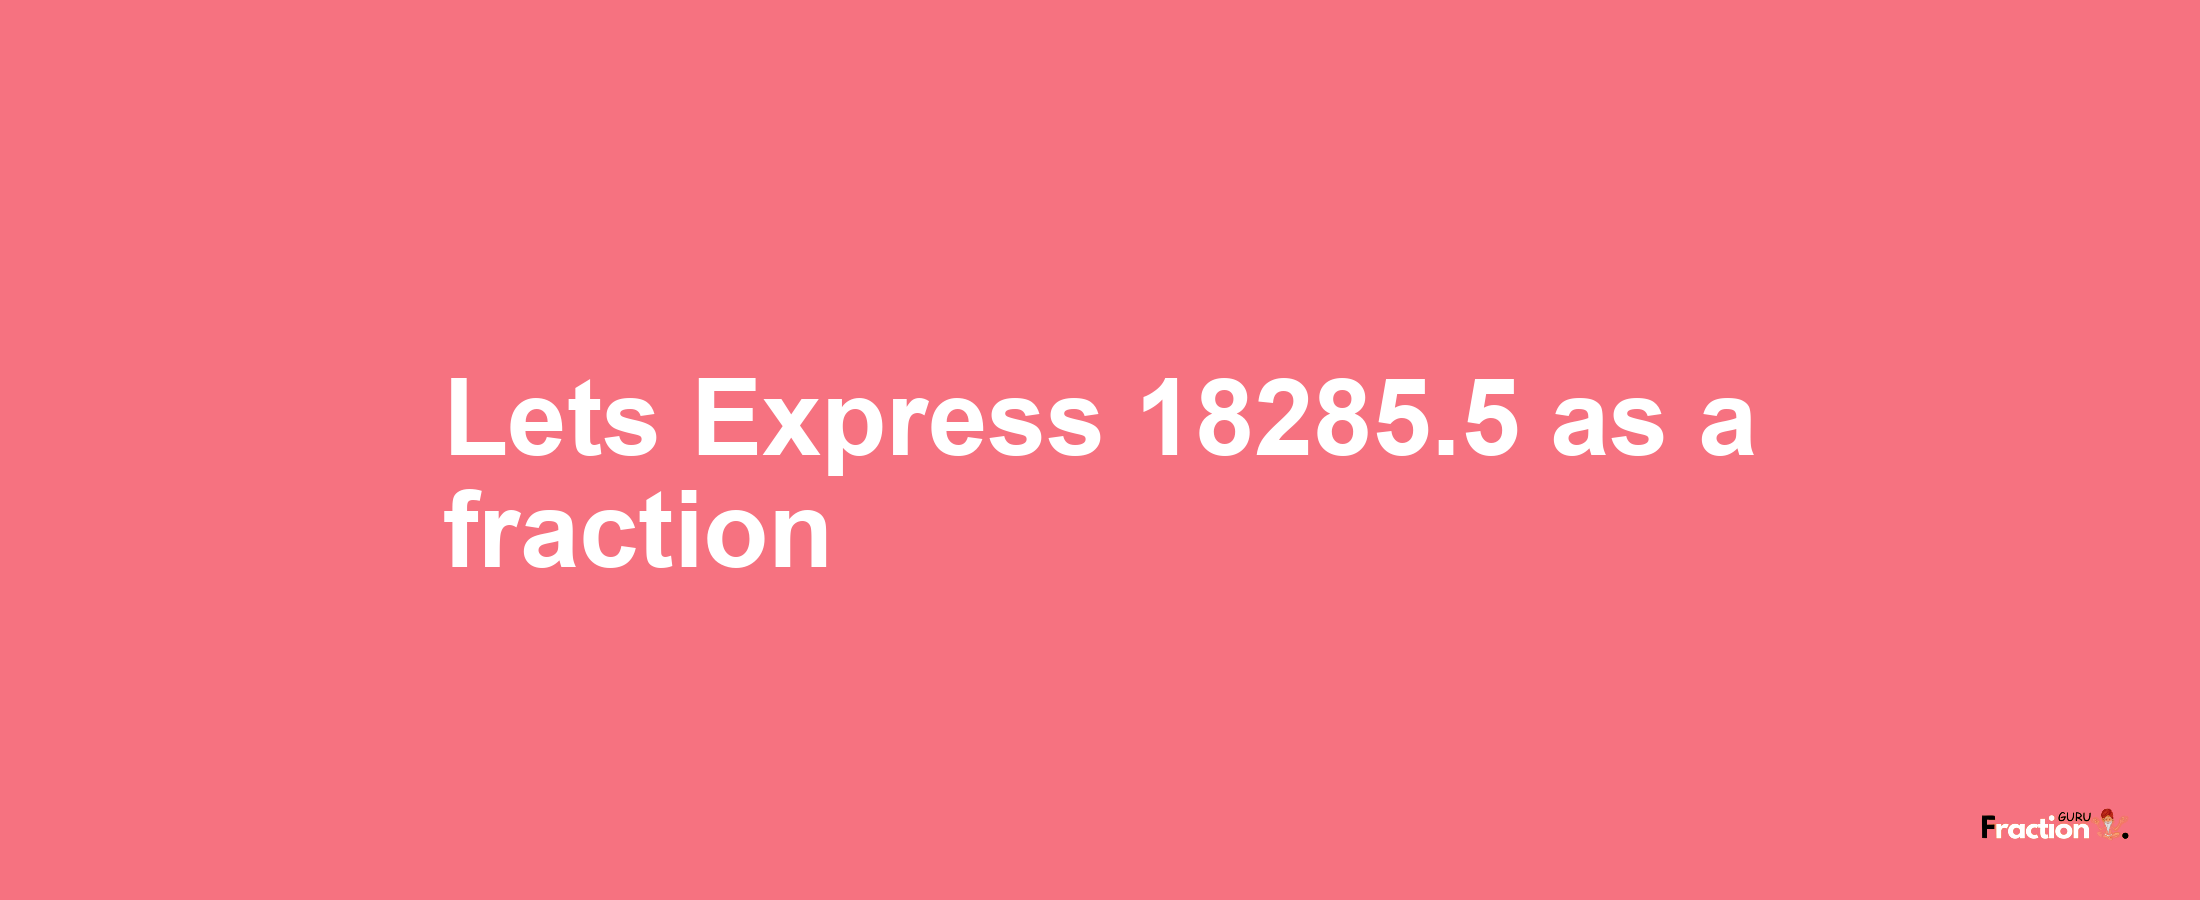 Lets Express 18285.5 as afraction